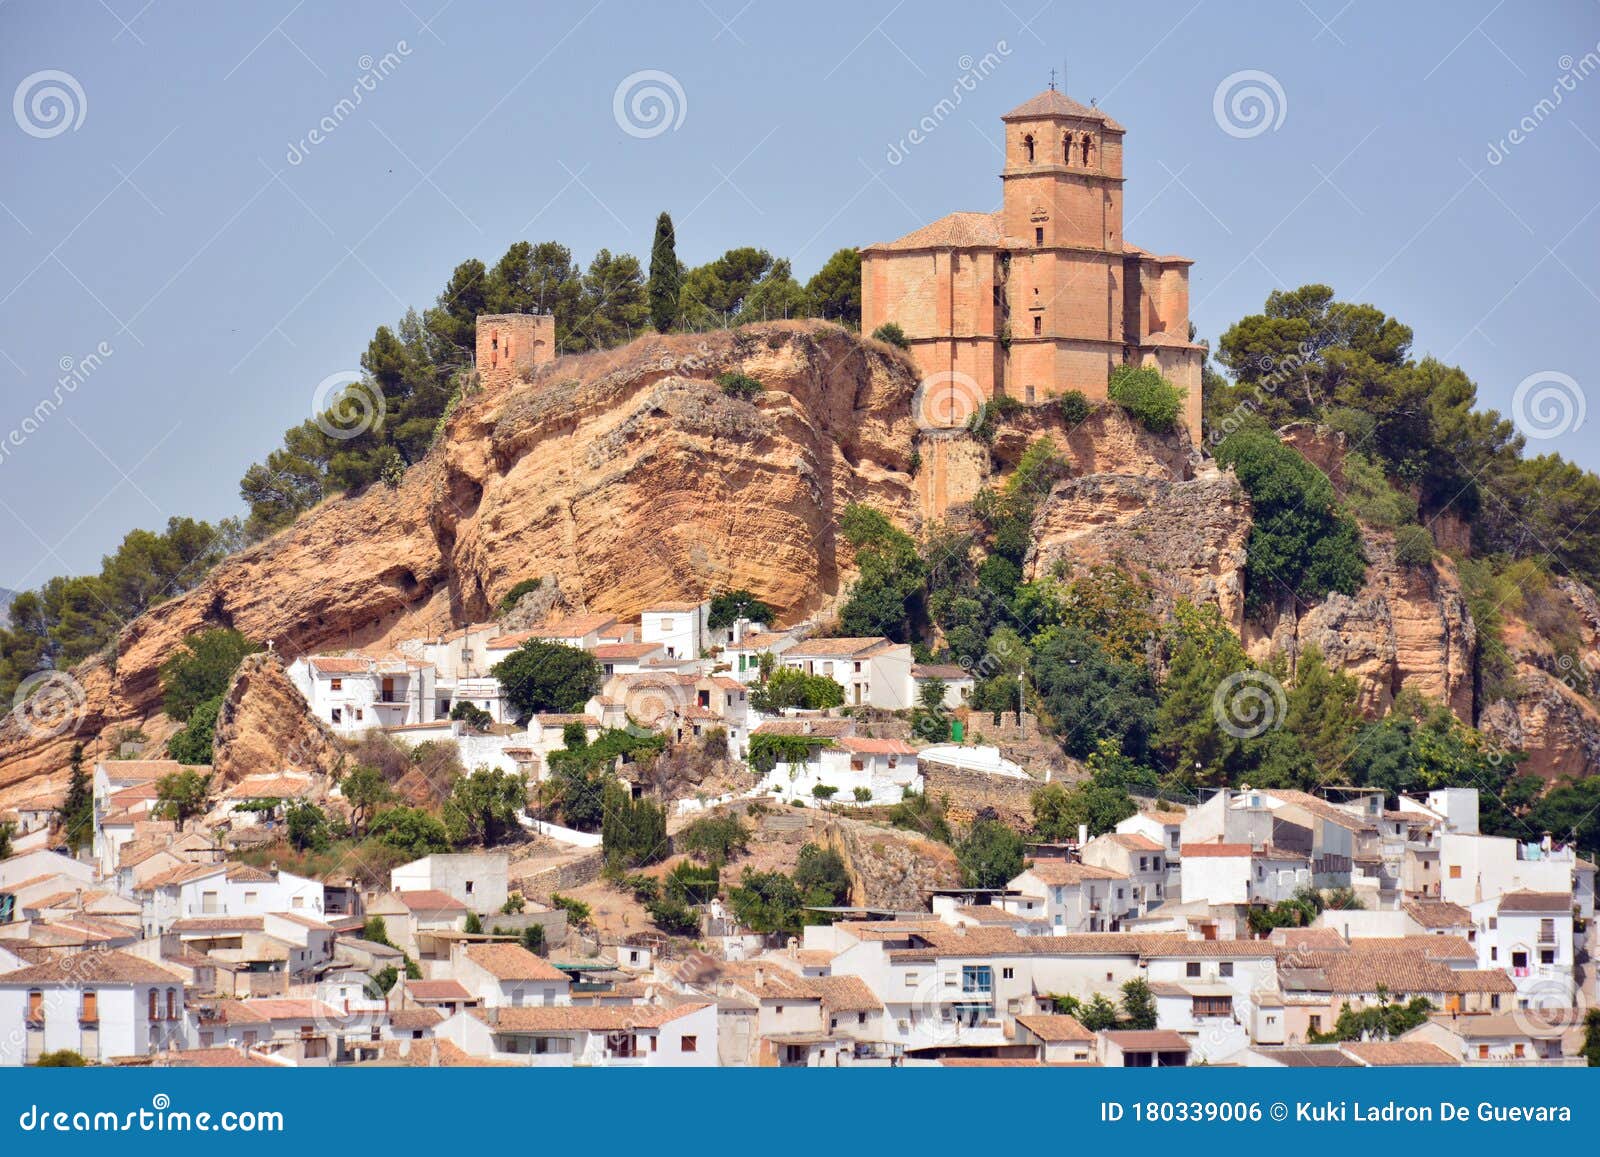 view of the town of montefrÃÂ­o, granada, spain